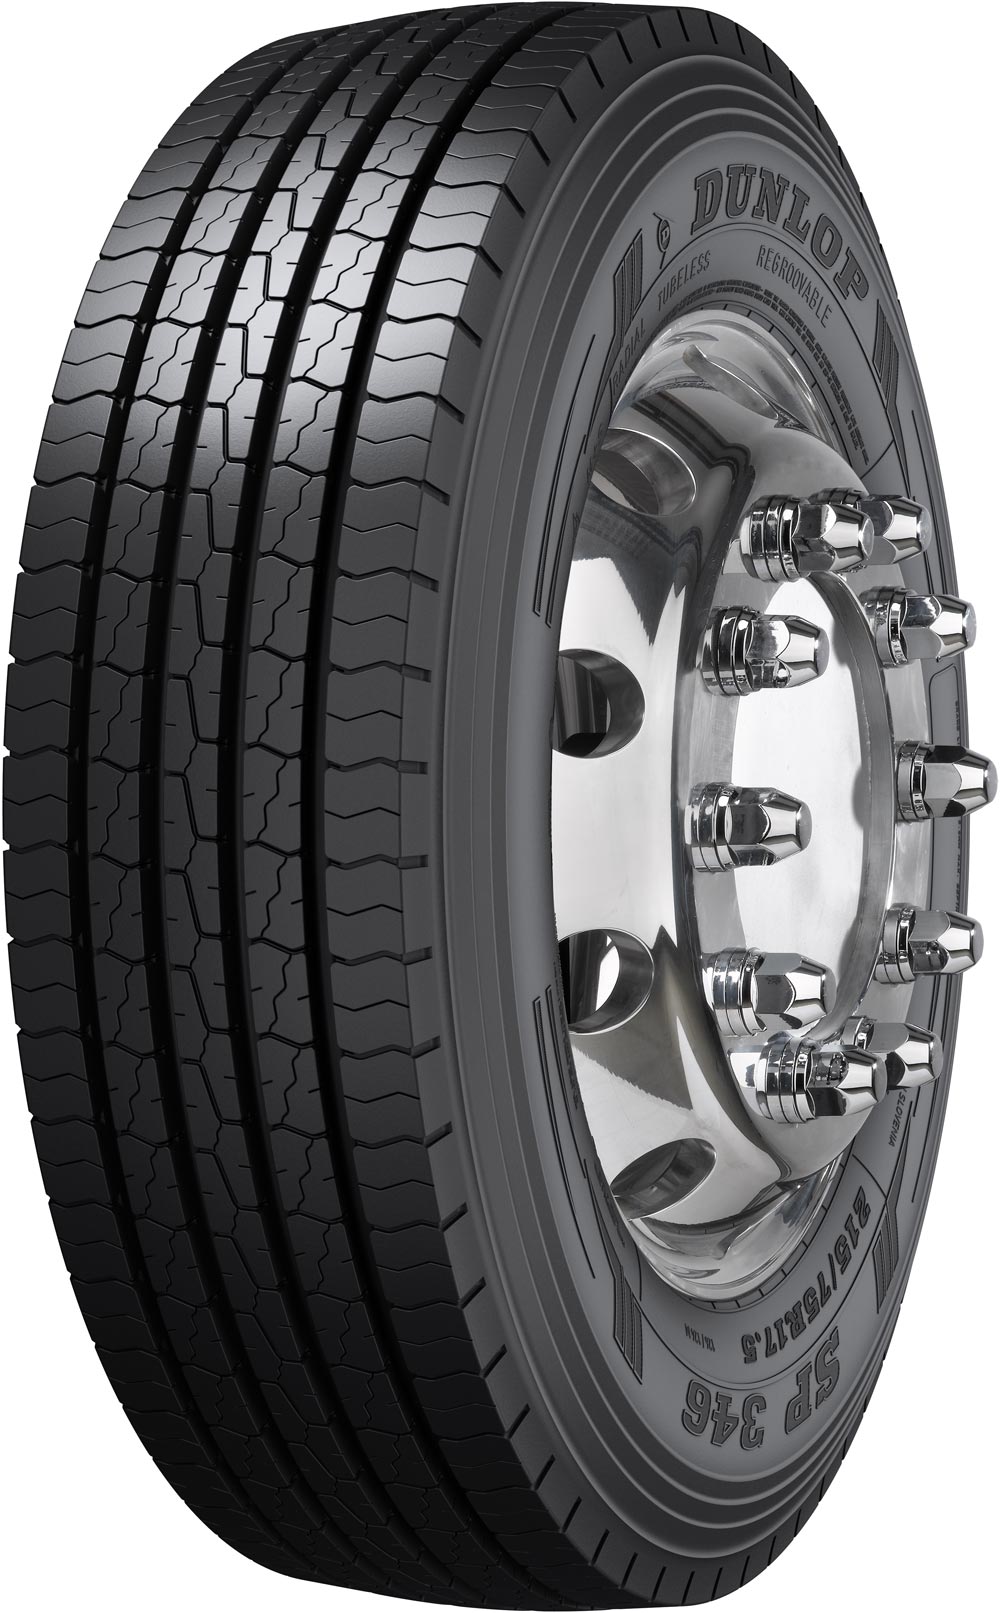 product_type-heavy_tires DUNLOP SP346 245/70 R17.5 136M